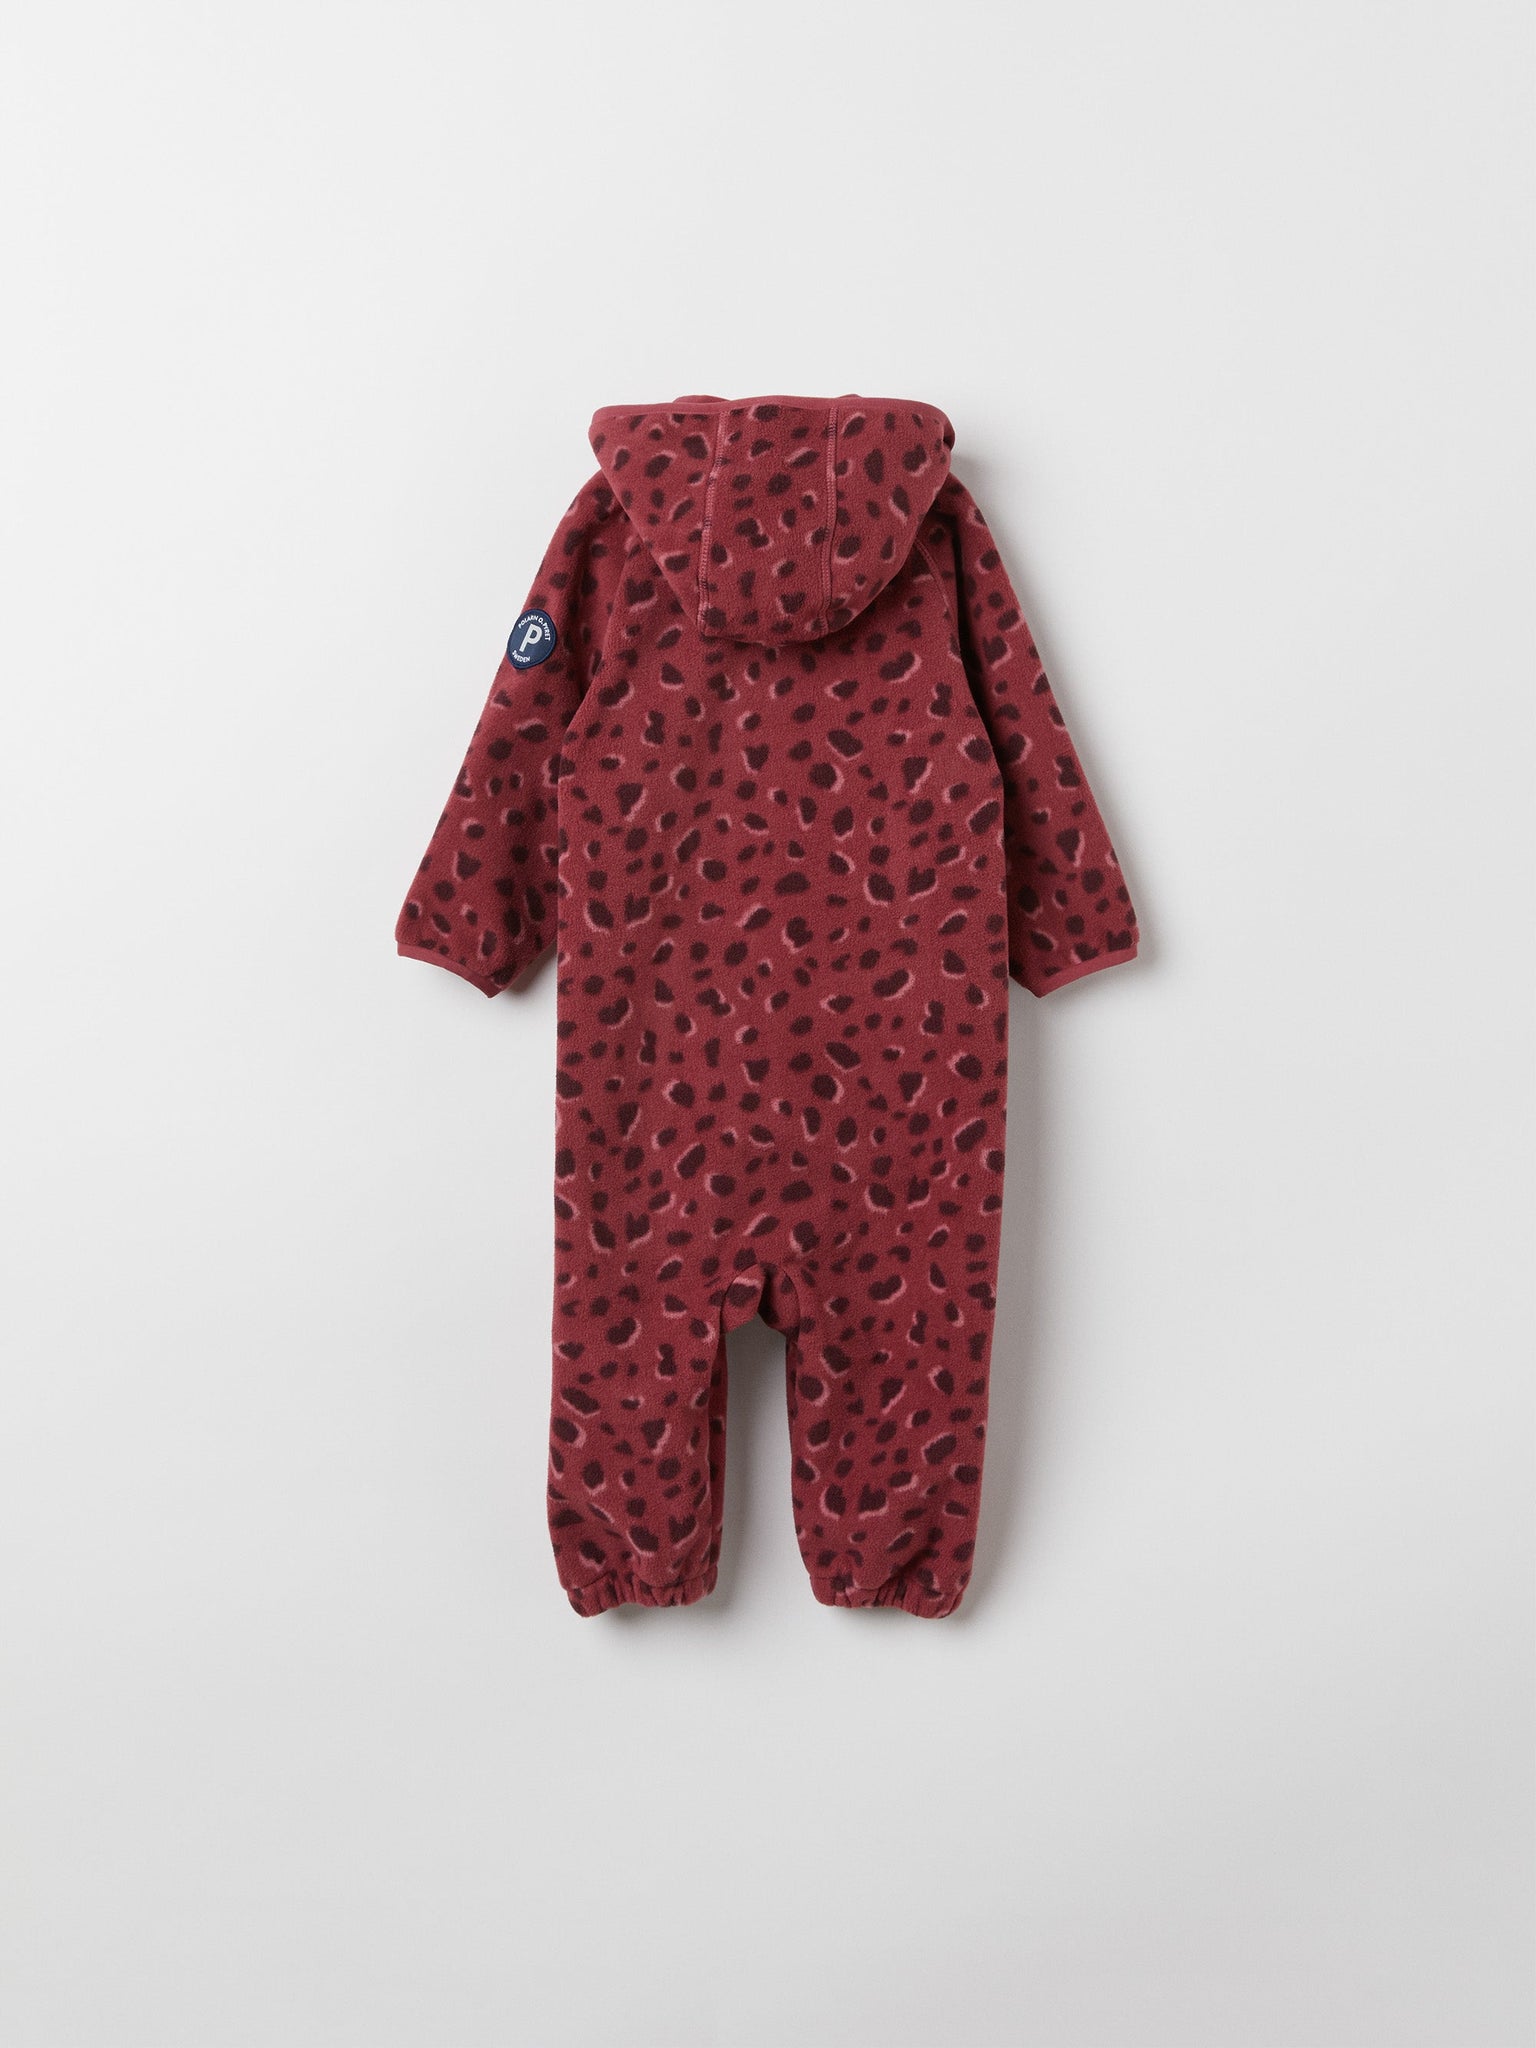 Red Windproof Fleece Baby Pramsuit from the Polarn O. Pyret outerwear collection. Ethically produced kids outerwear.